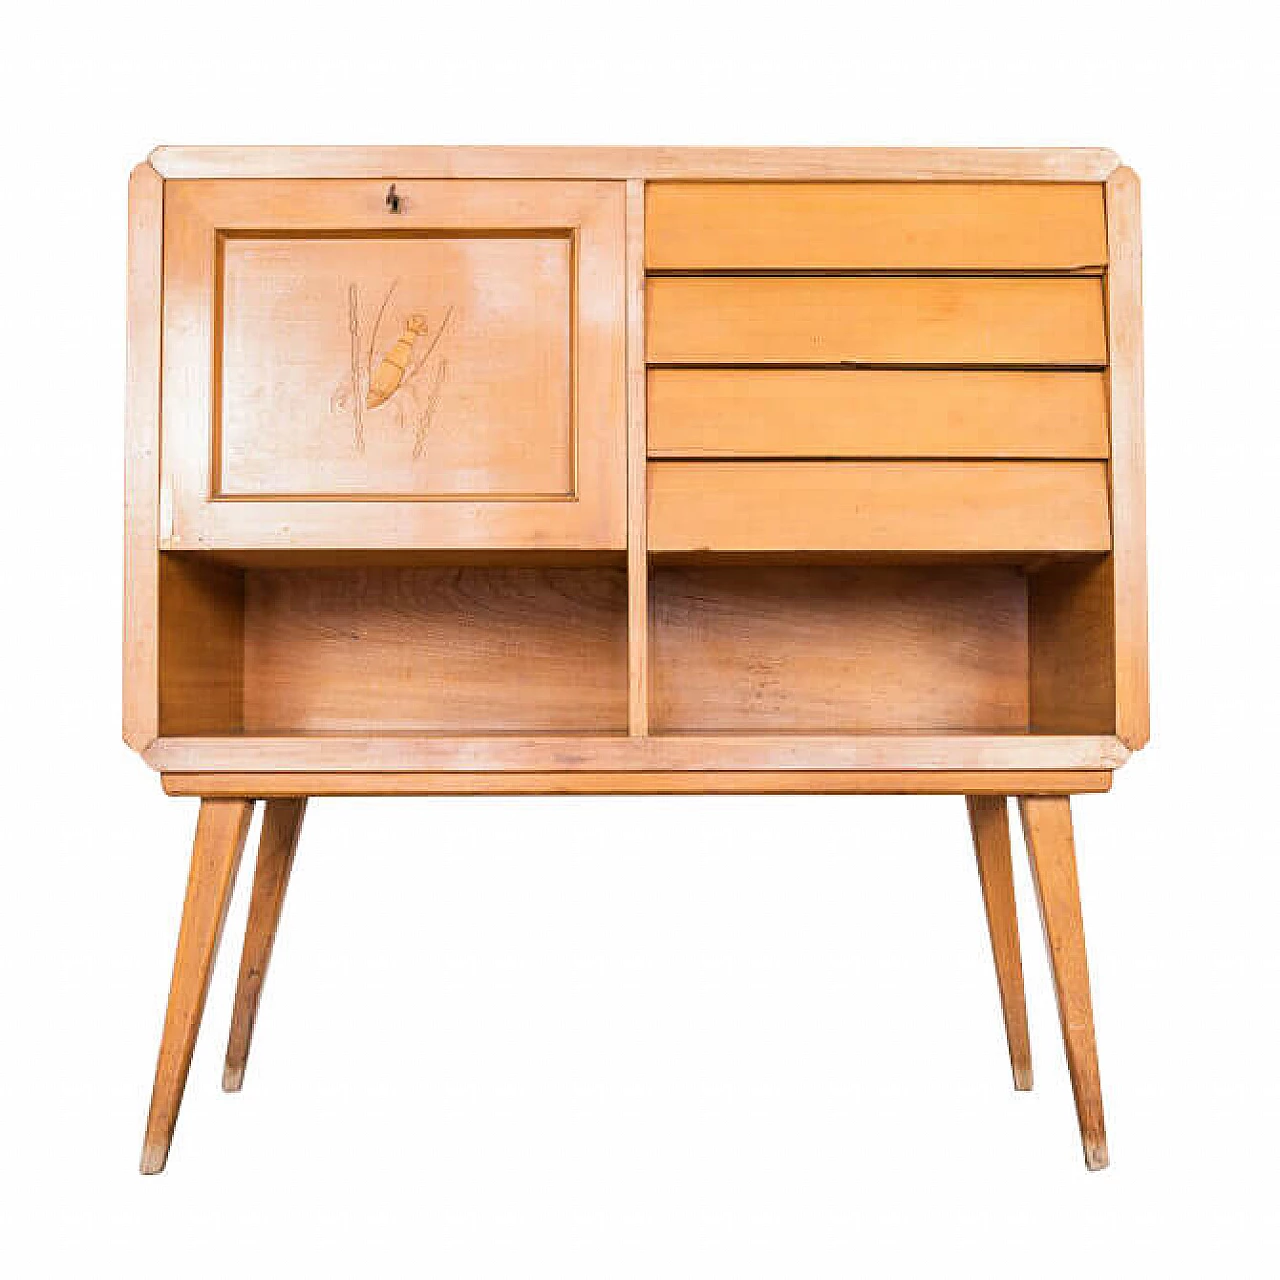 Sideboard with bar corner in wood and glass, 1950s 1217490